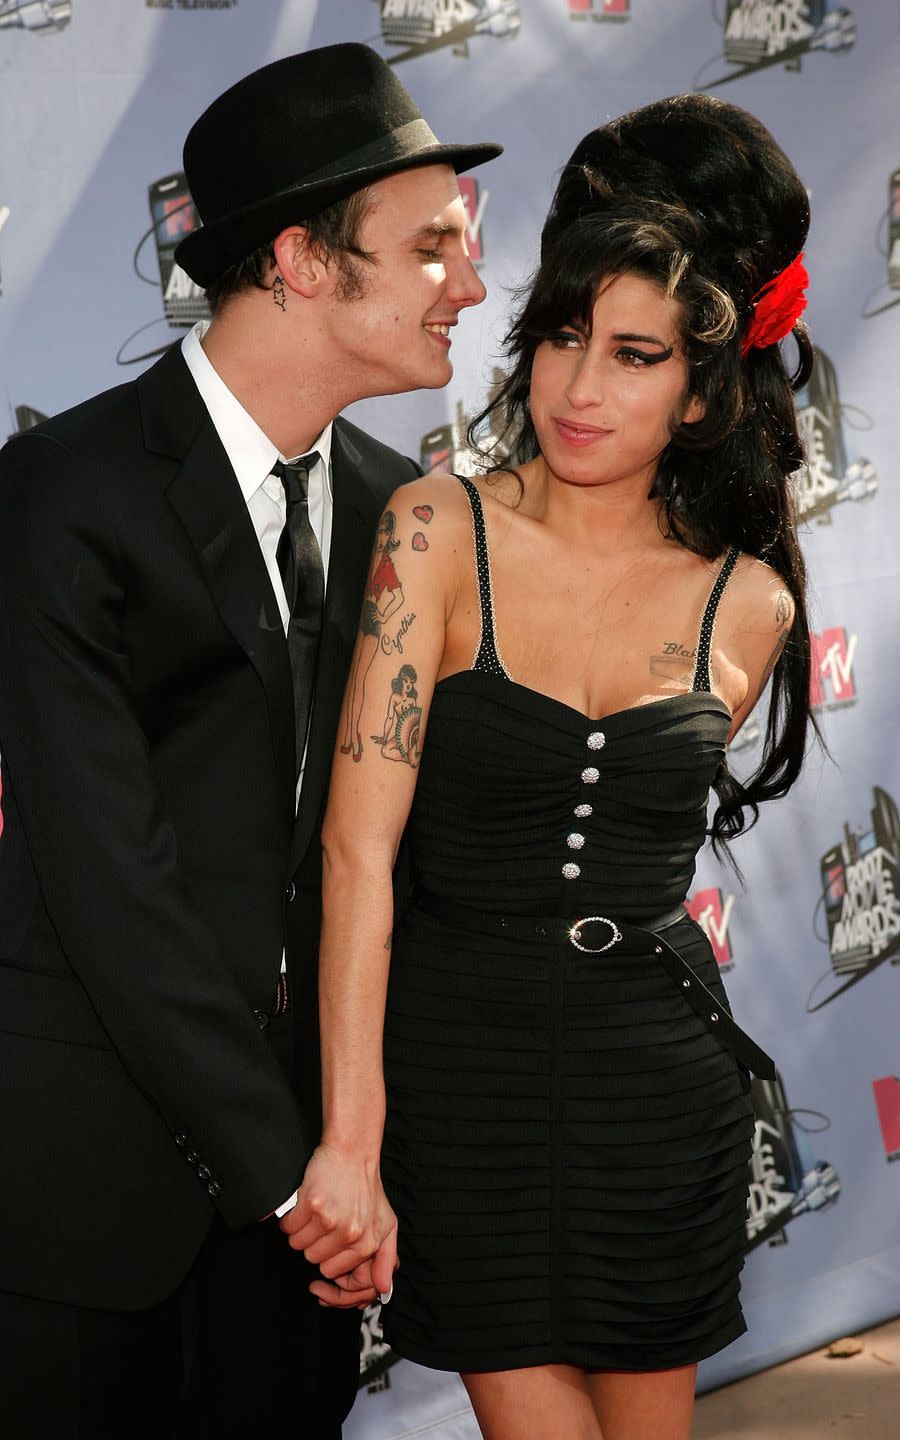 blake fielder civil and amy winehouse stand together in front of lavender photo backdrop with logos, he looks at her and smiles and she looks to the left and smiles, they hold hands and both wear black outfits